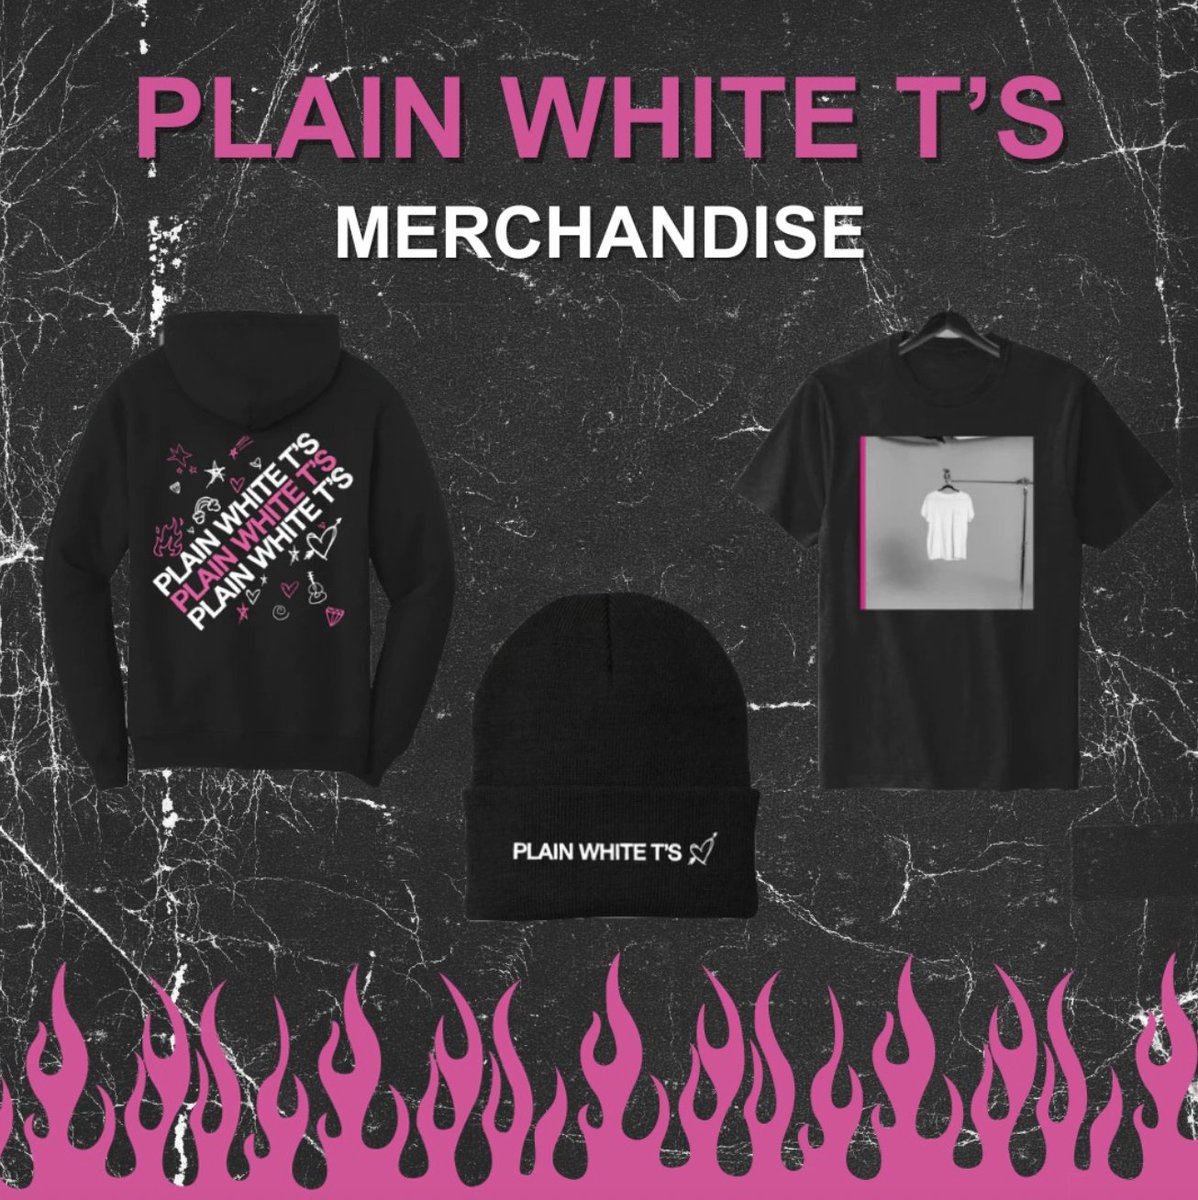 Grab our new Plain White T's merchandise to commemorate The Fired Up Tour!! 🖤 plainwhitets.com/#tour